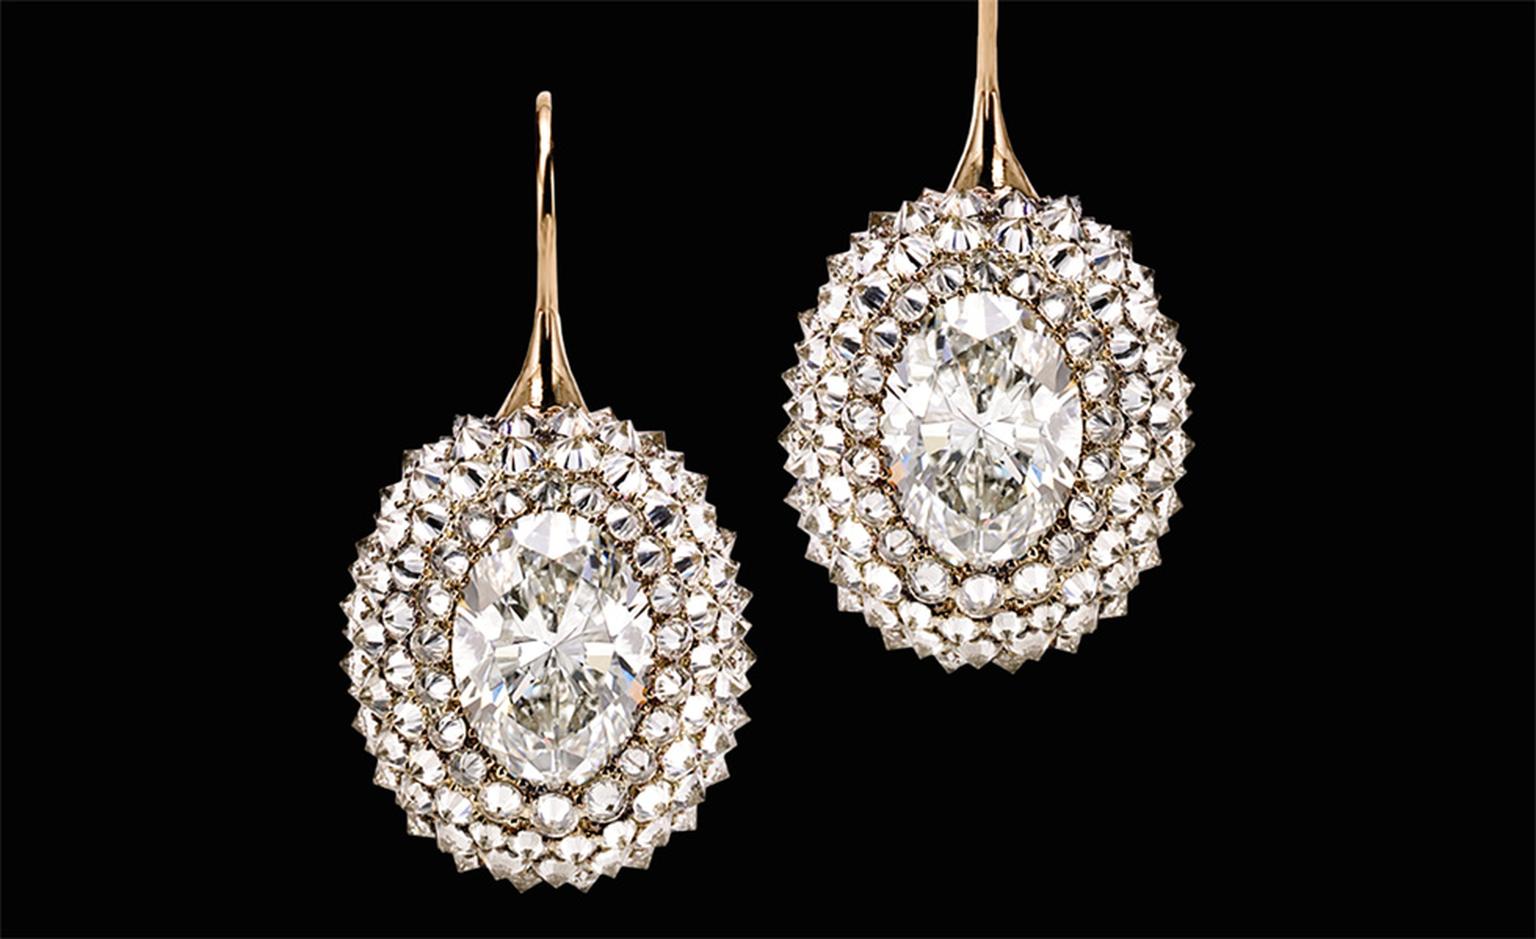 Sotheby's Diamonds Durian Fruit earrings. The smaller diamonds are set upside down so that the pointed ends are facing out. The effect is one of rich texture and intense fire.